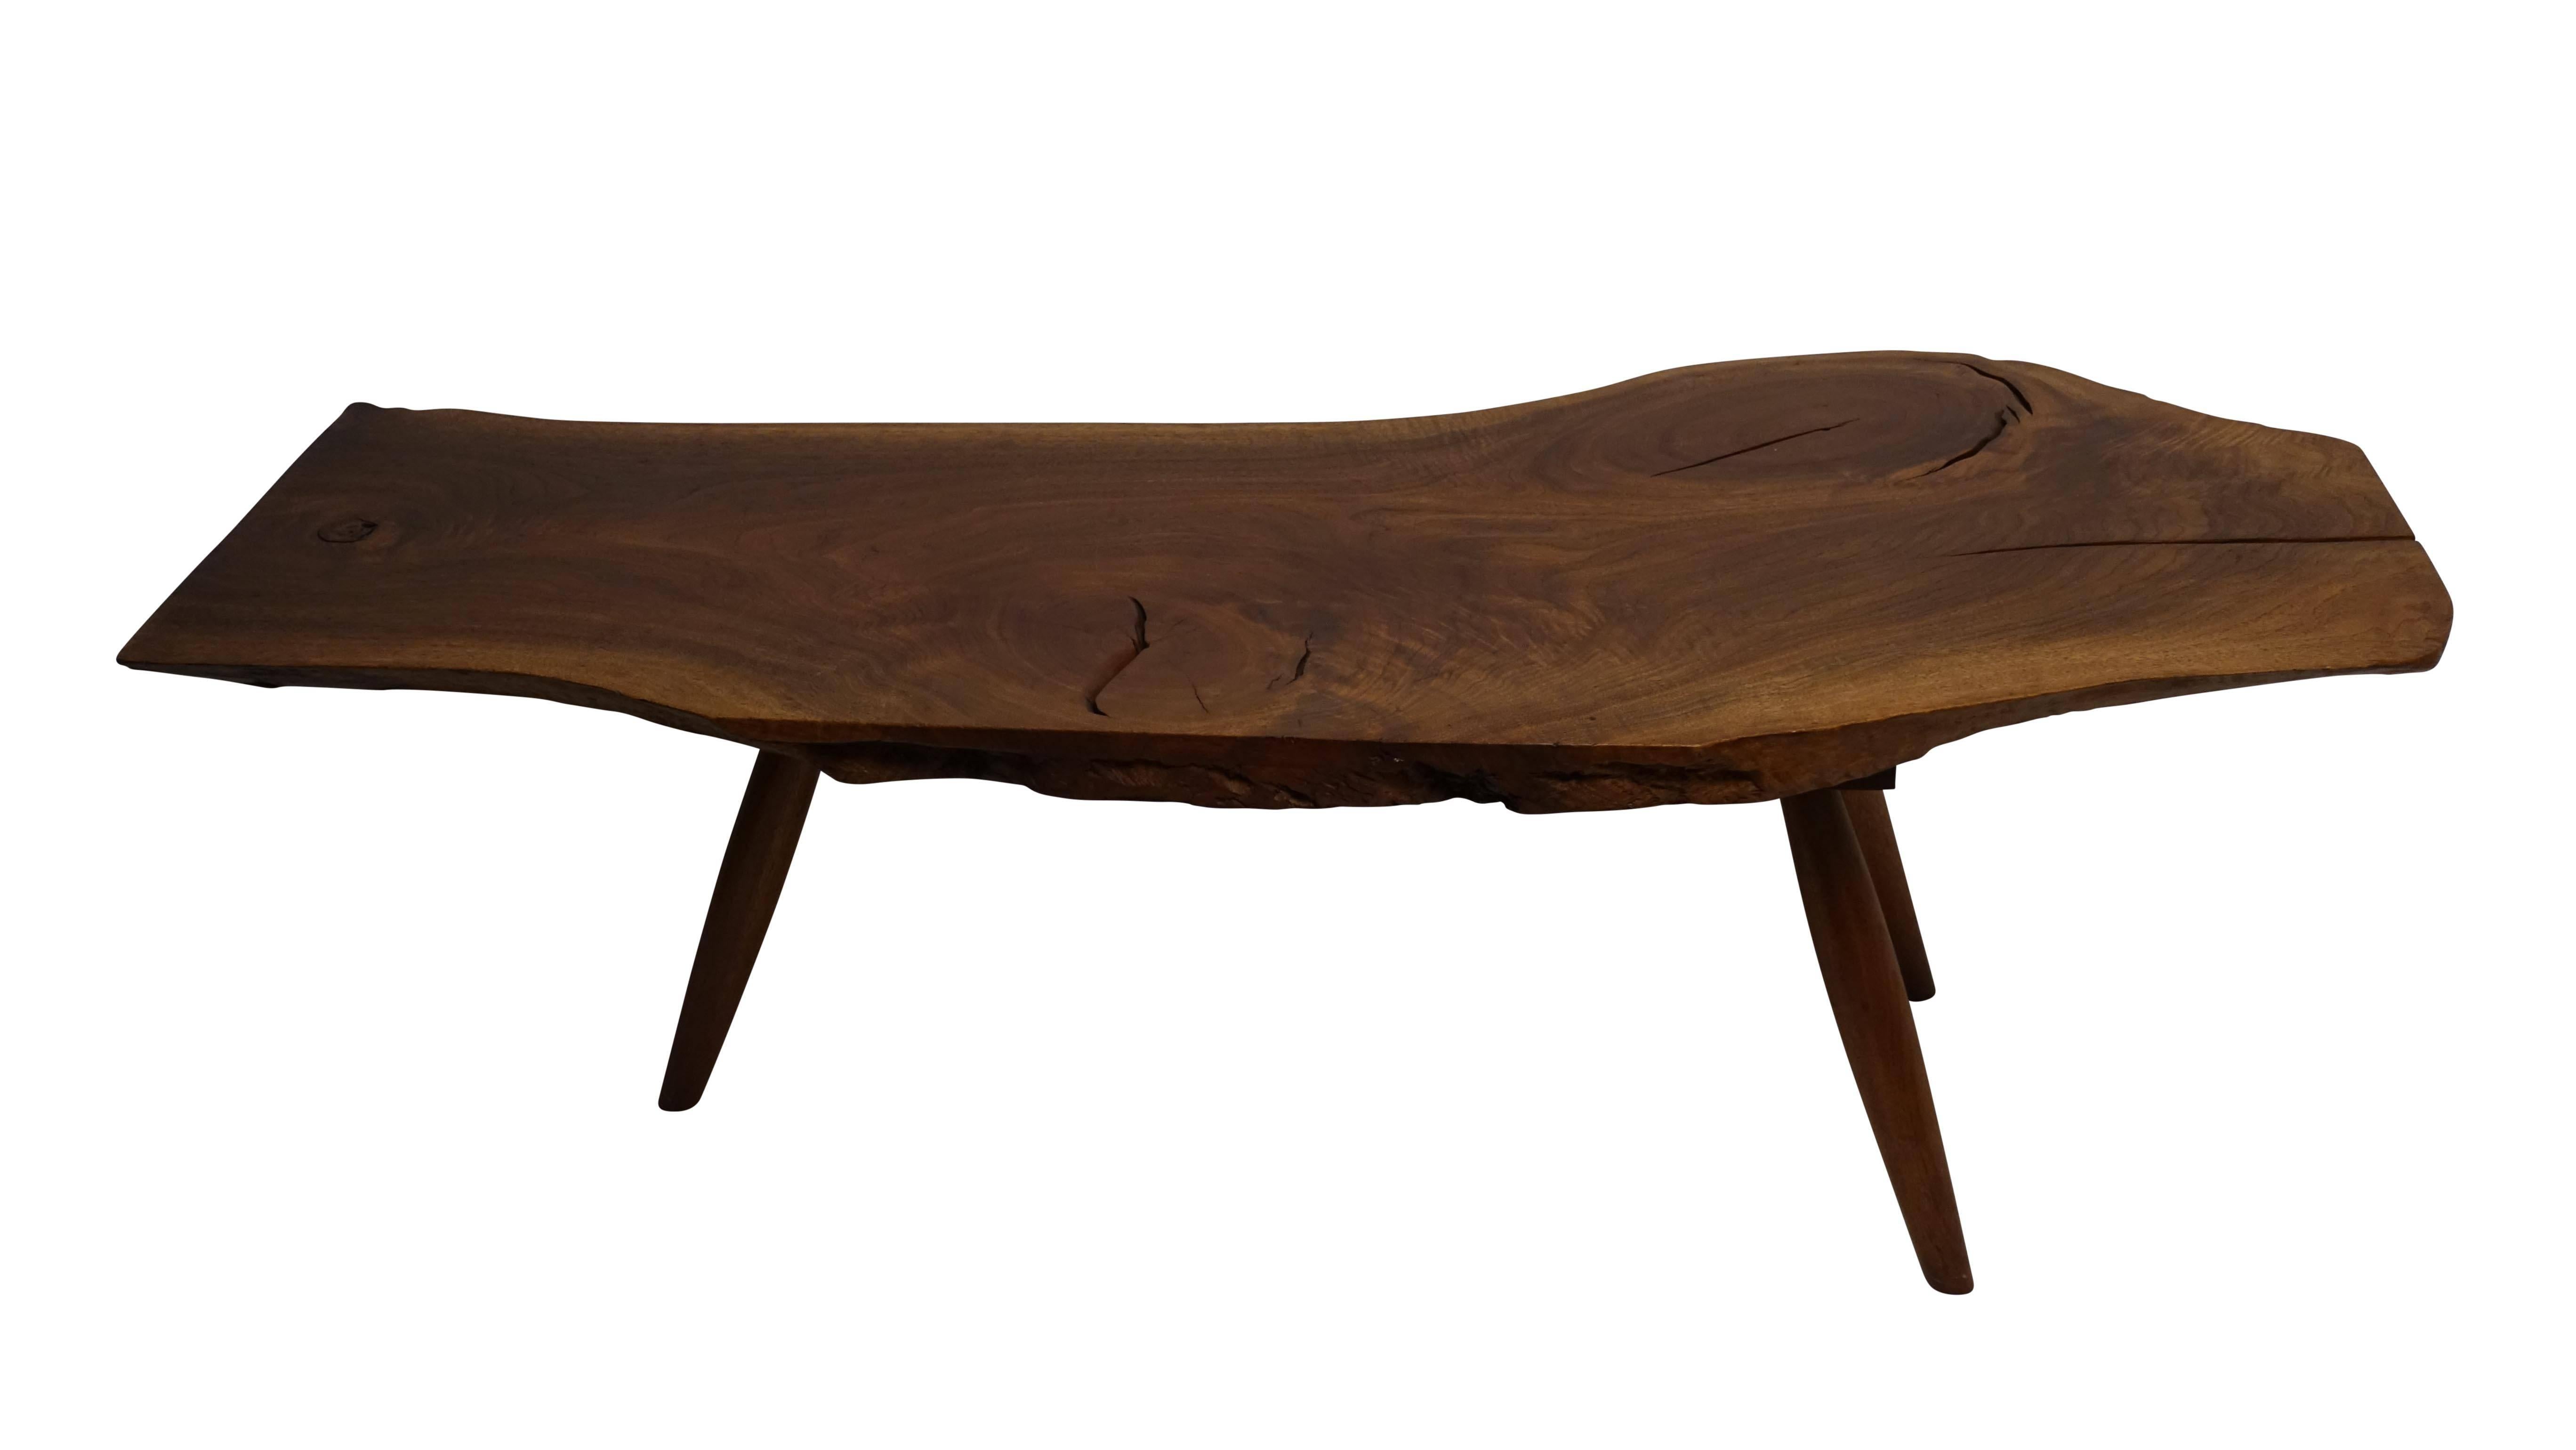 Beautifully figured walnut plank coffee table with three knots standing on tapering legs. American, circa 1970.